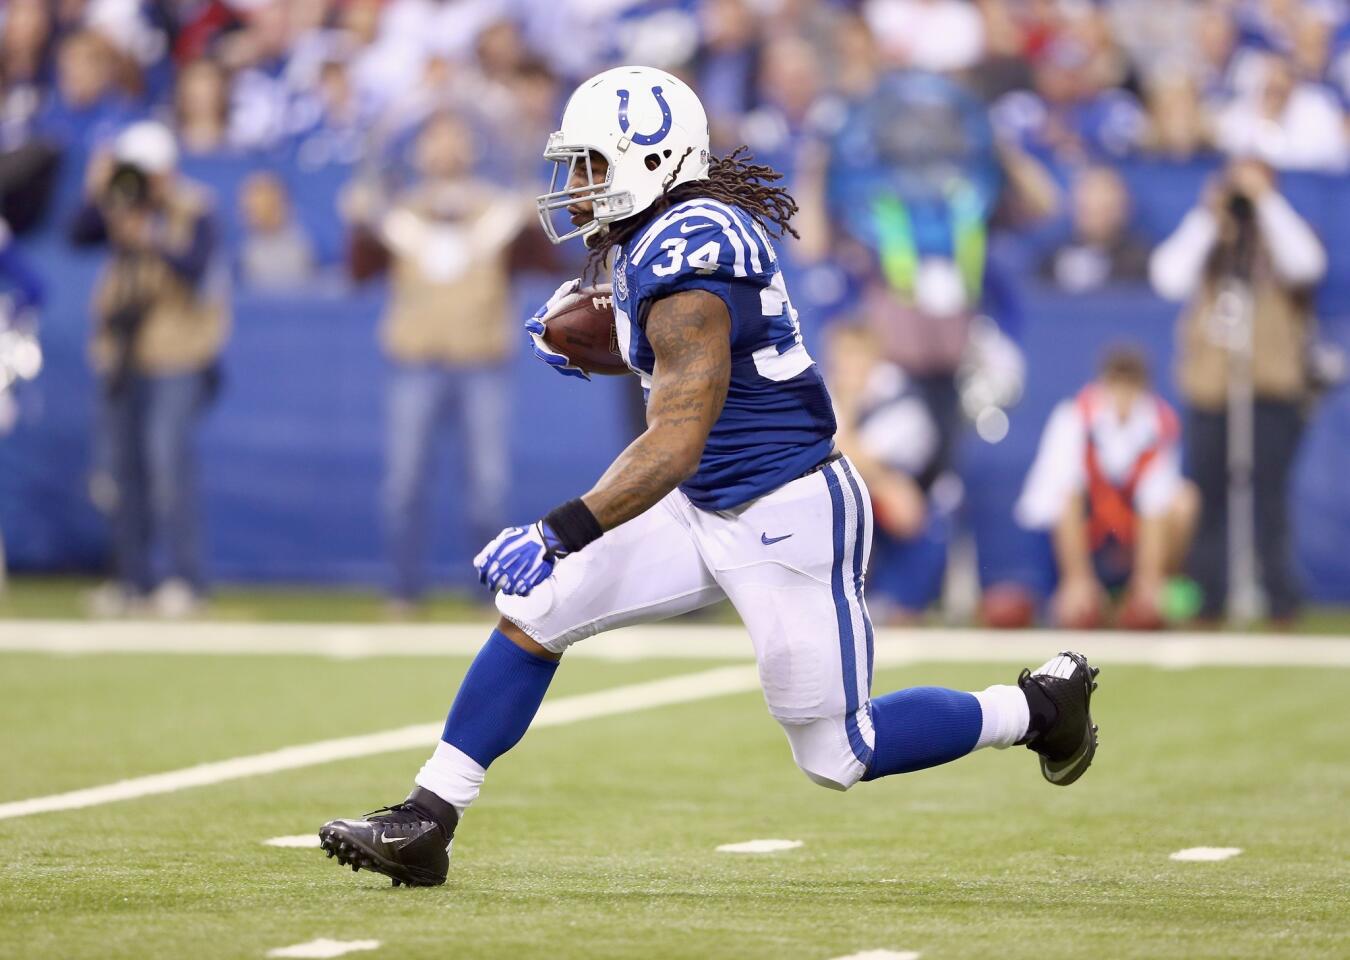 Overrated: Trent Richardson, RB, Indianapolis Colts